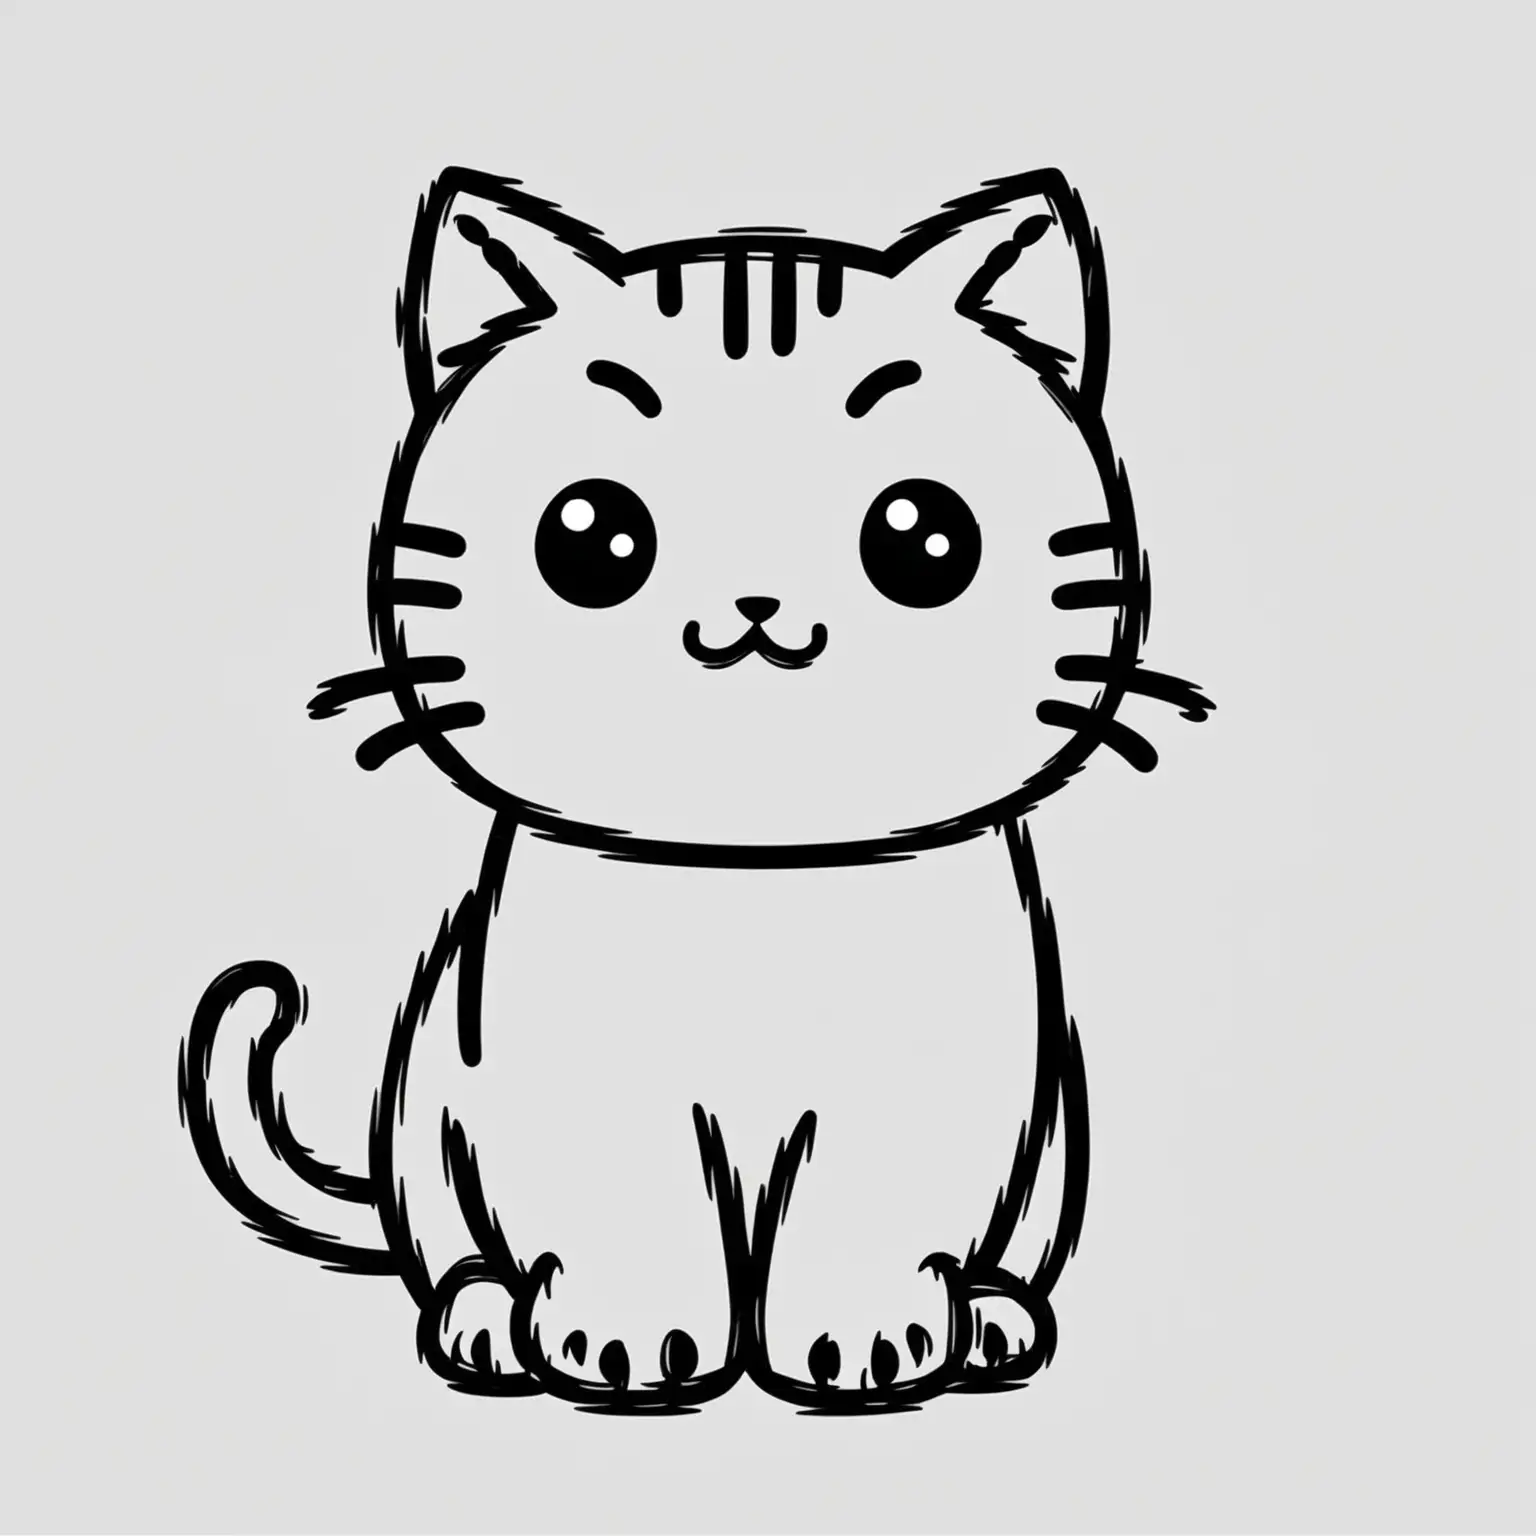 coloring image for kids, outline only, no grayscale, no background, black and white, thick lines only, cute kitty